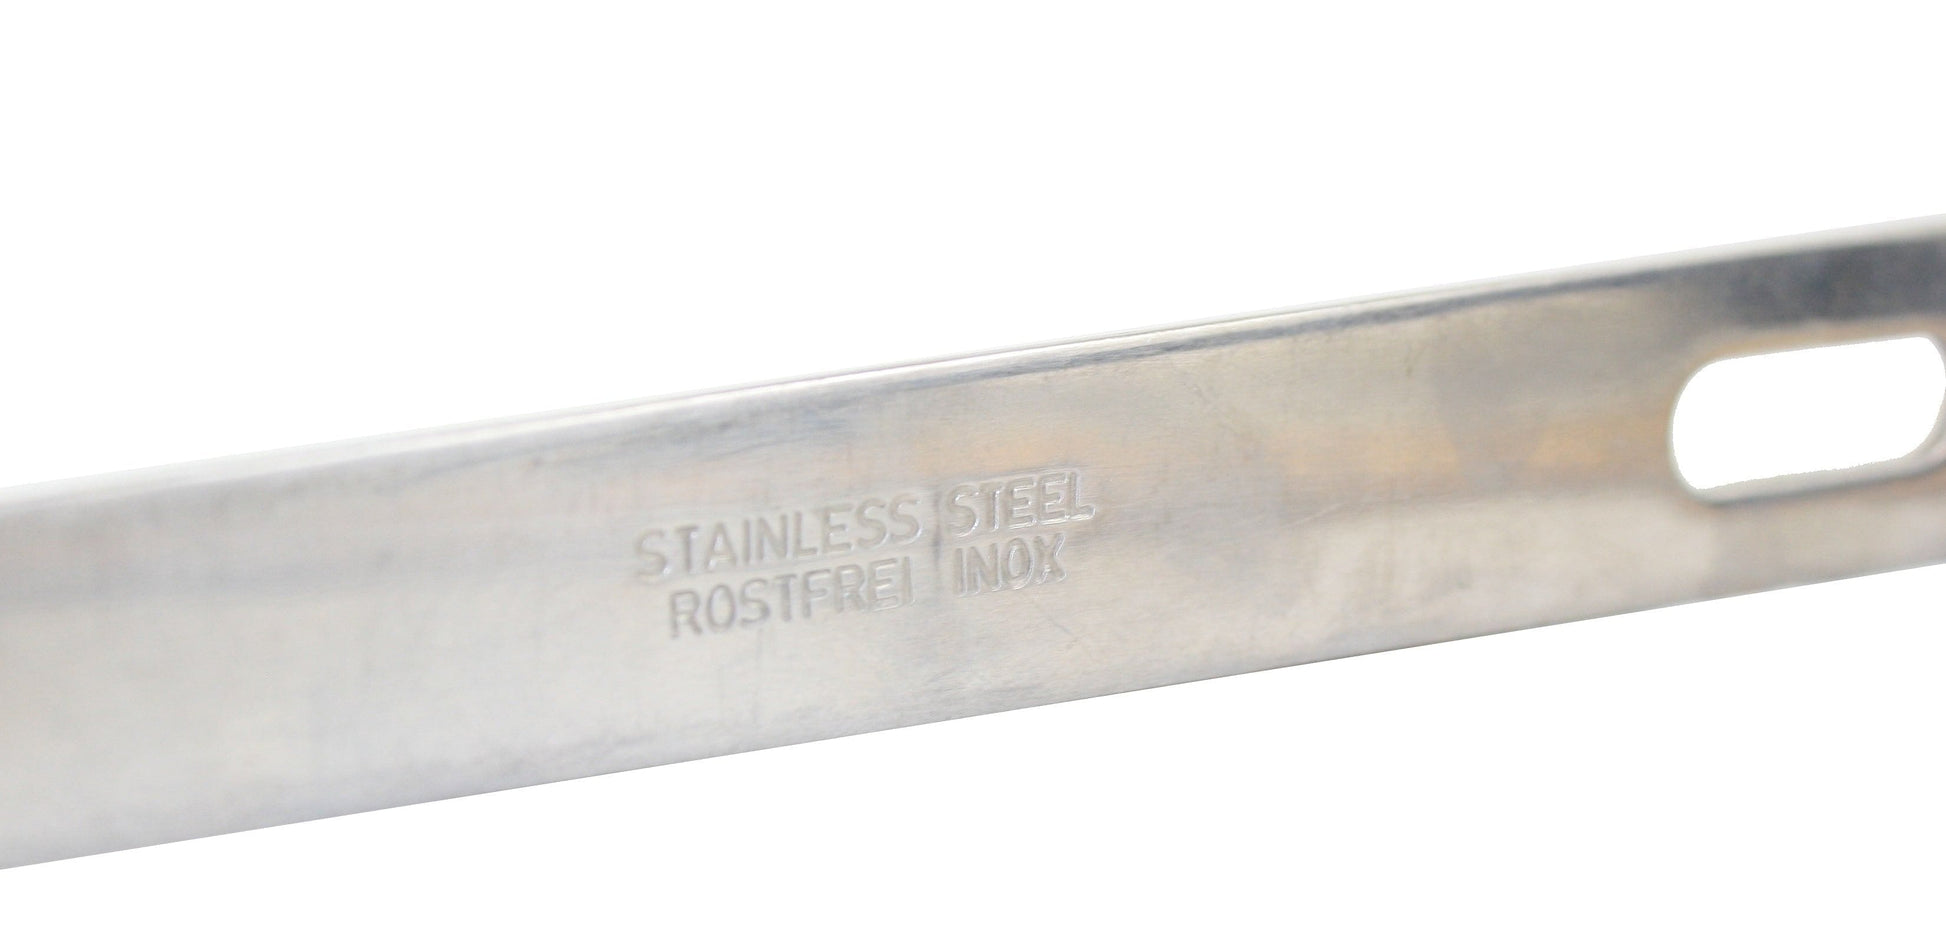 Rostfrei Stainless Steel Carving Fork - Shelburne Country Store